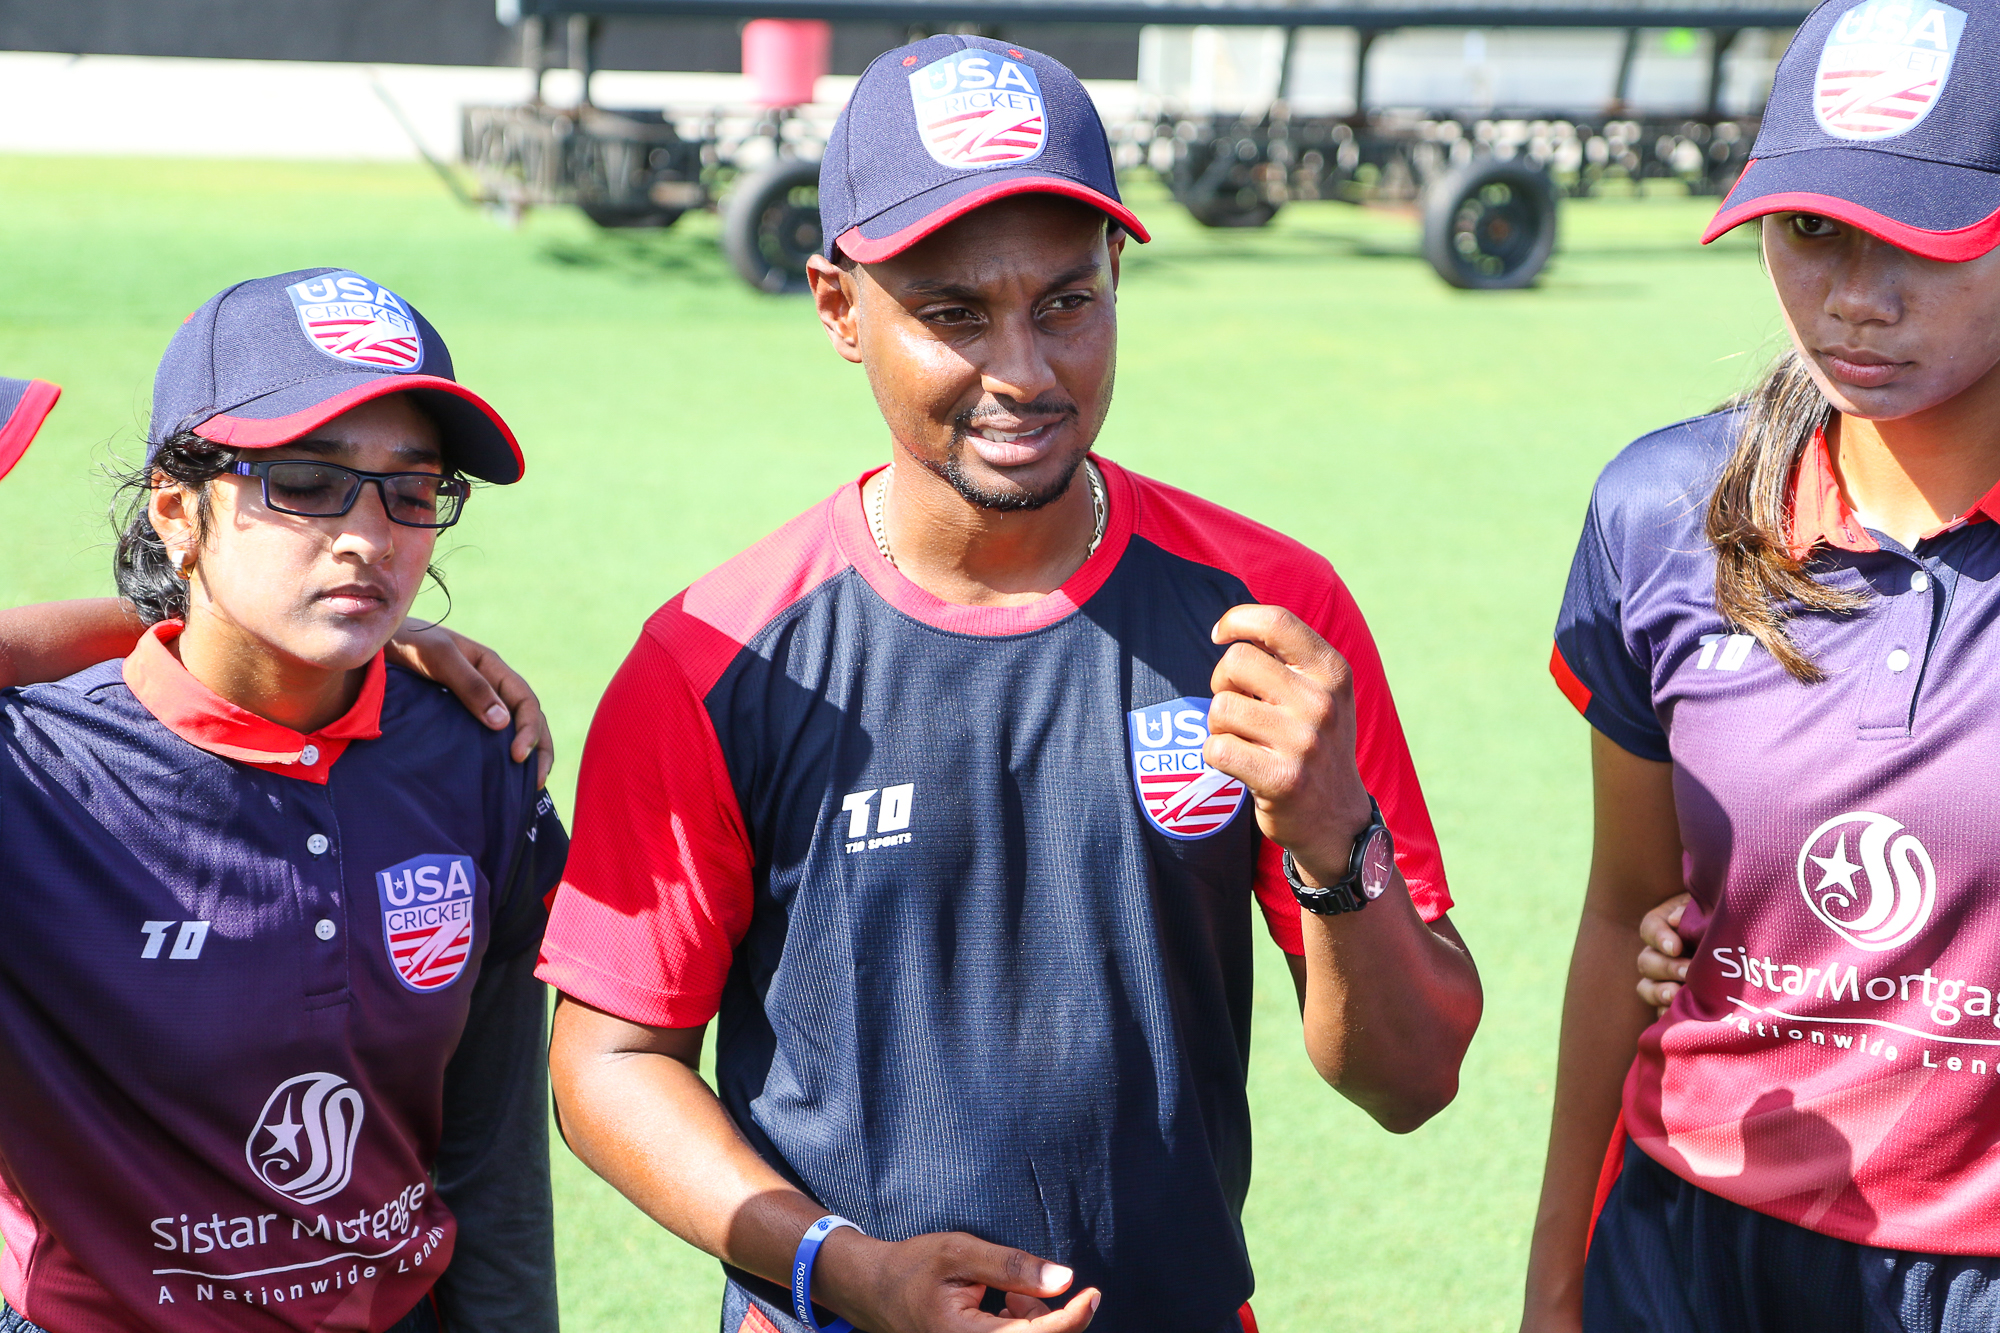 Launch of Full USA Cricket Level 1 Coaching Course